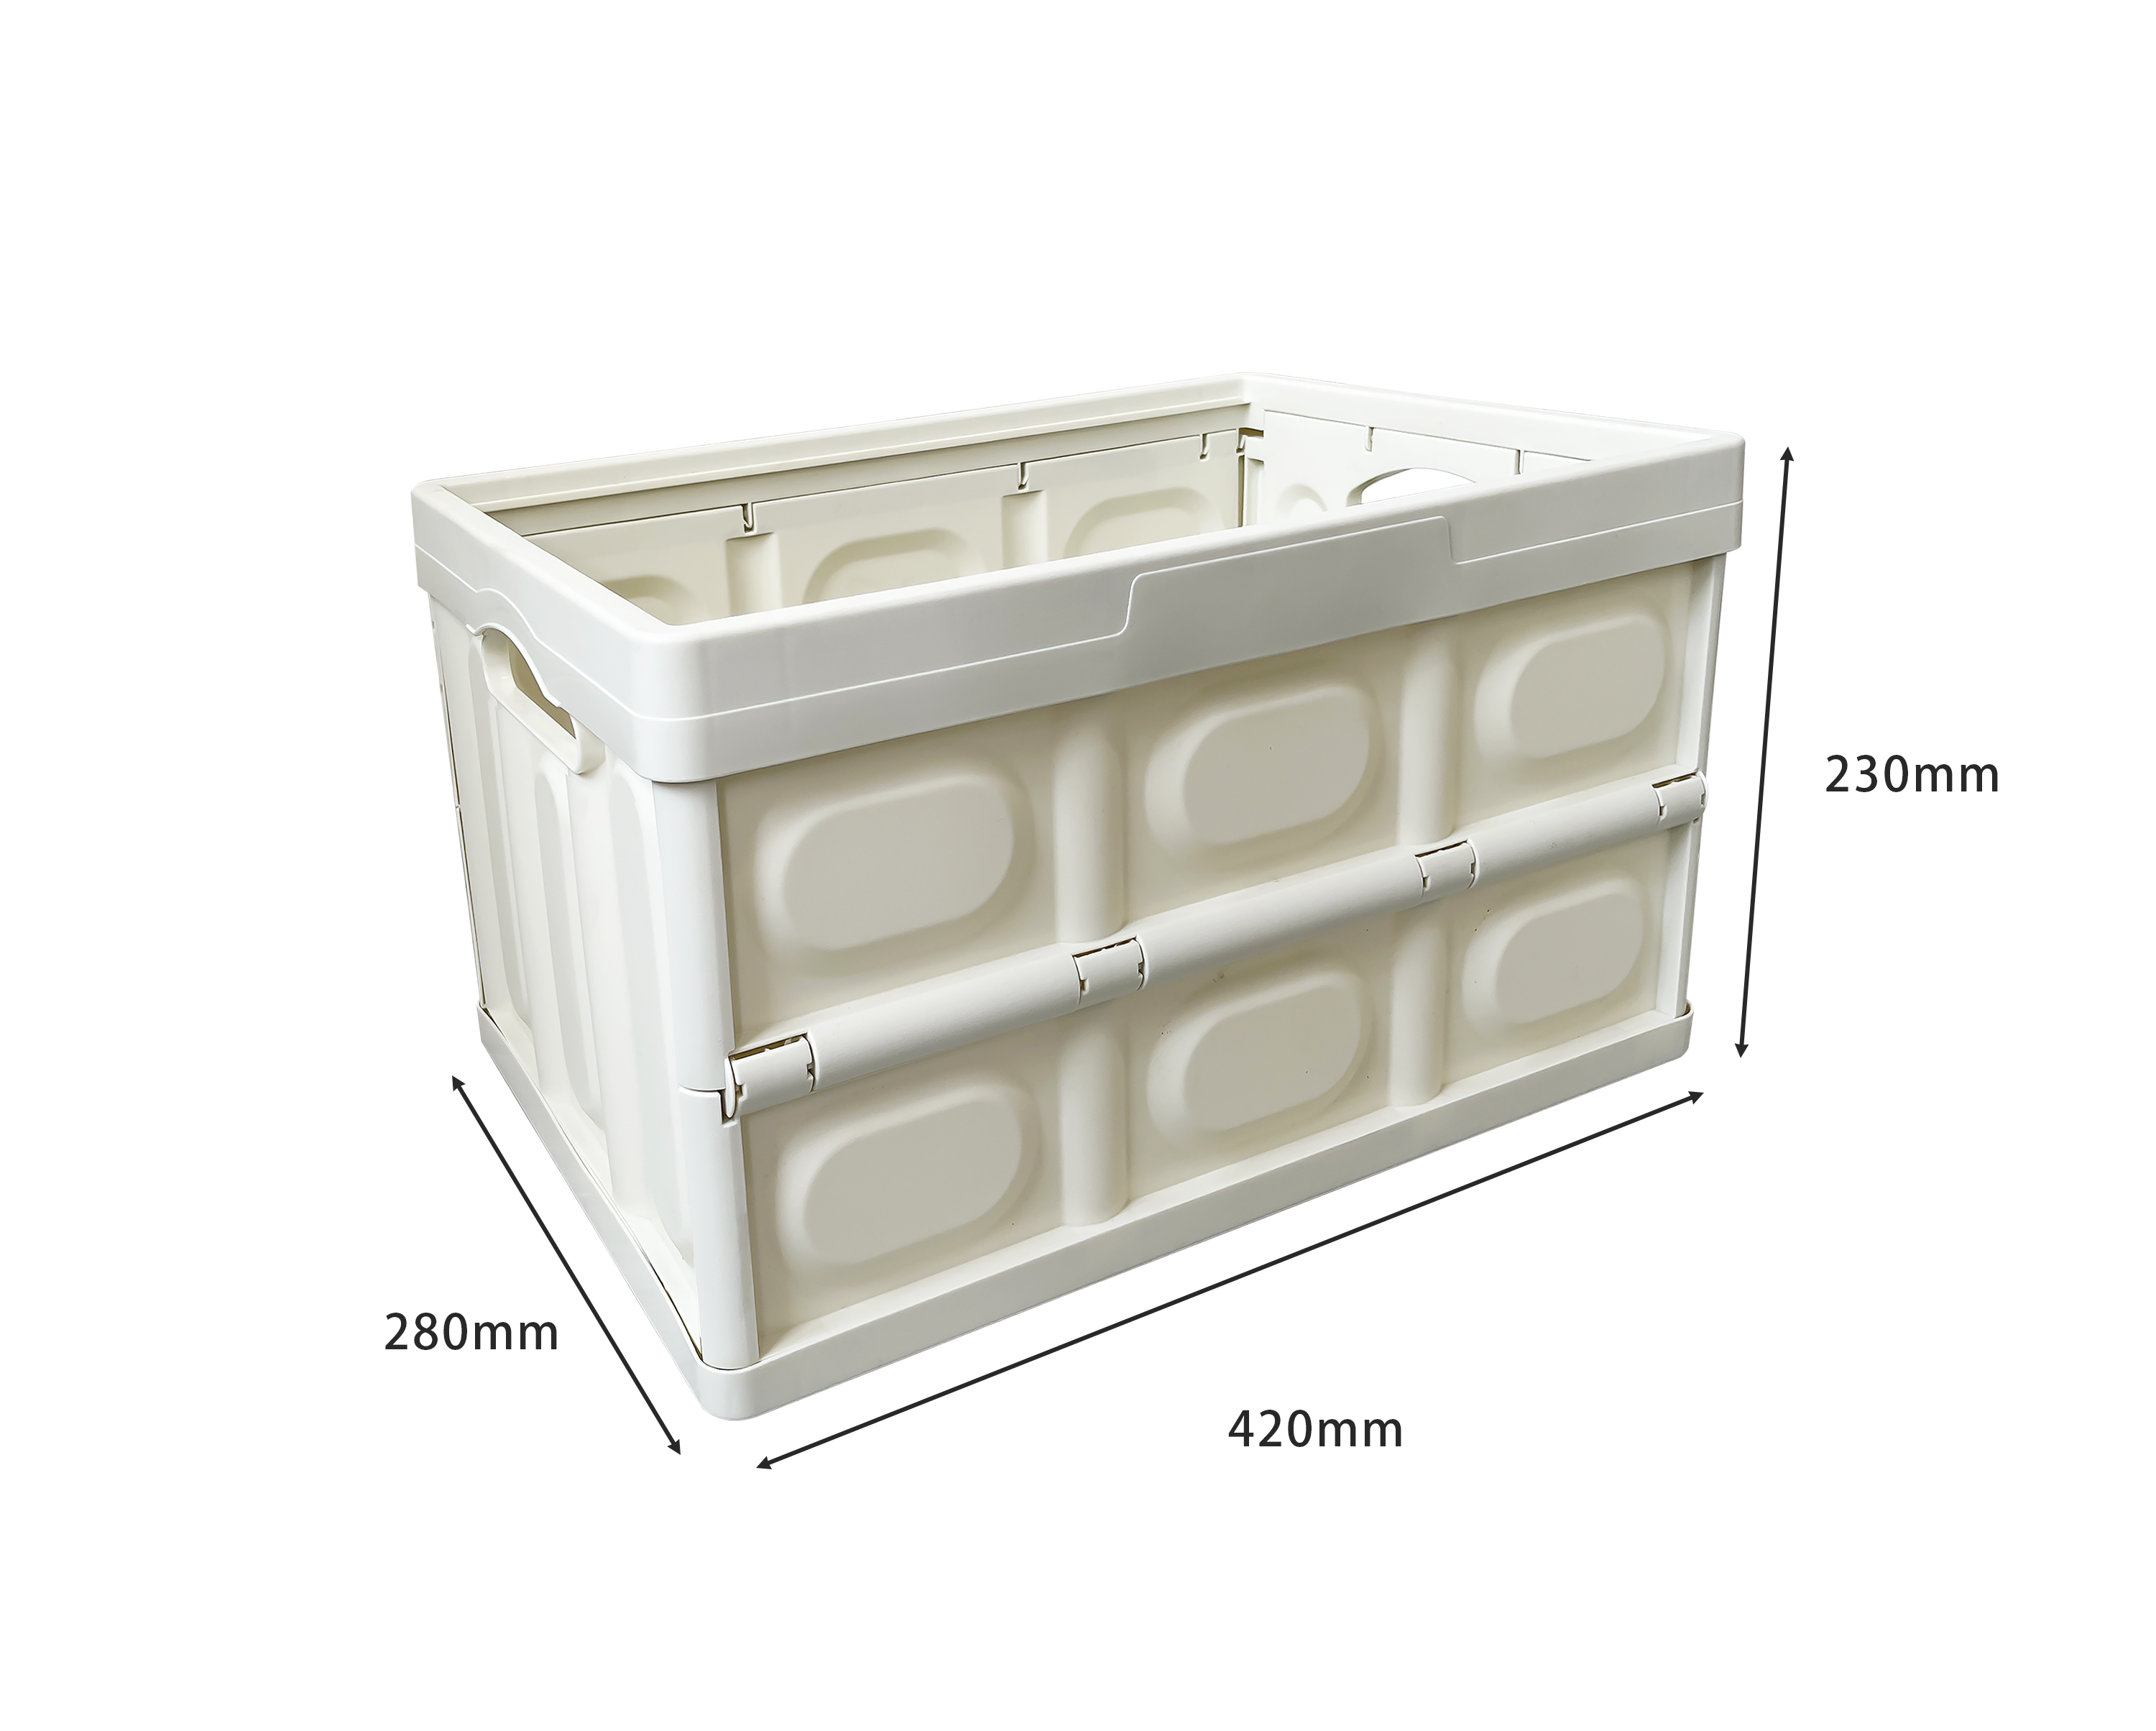 22L small size 418x285x234mm solid style collapsible folding container storage box